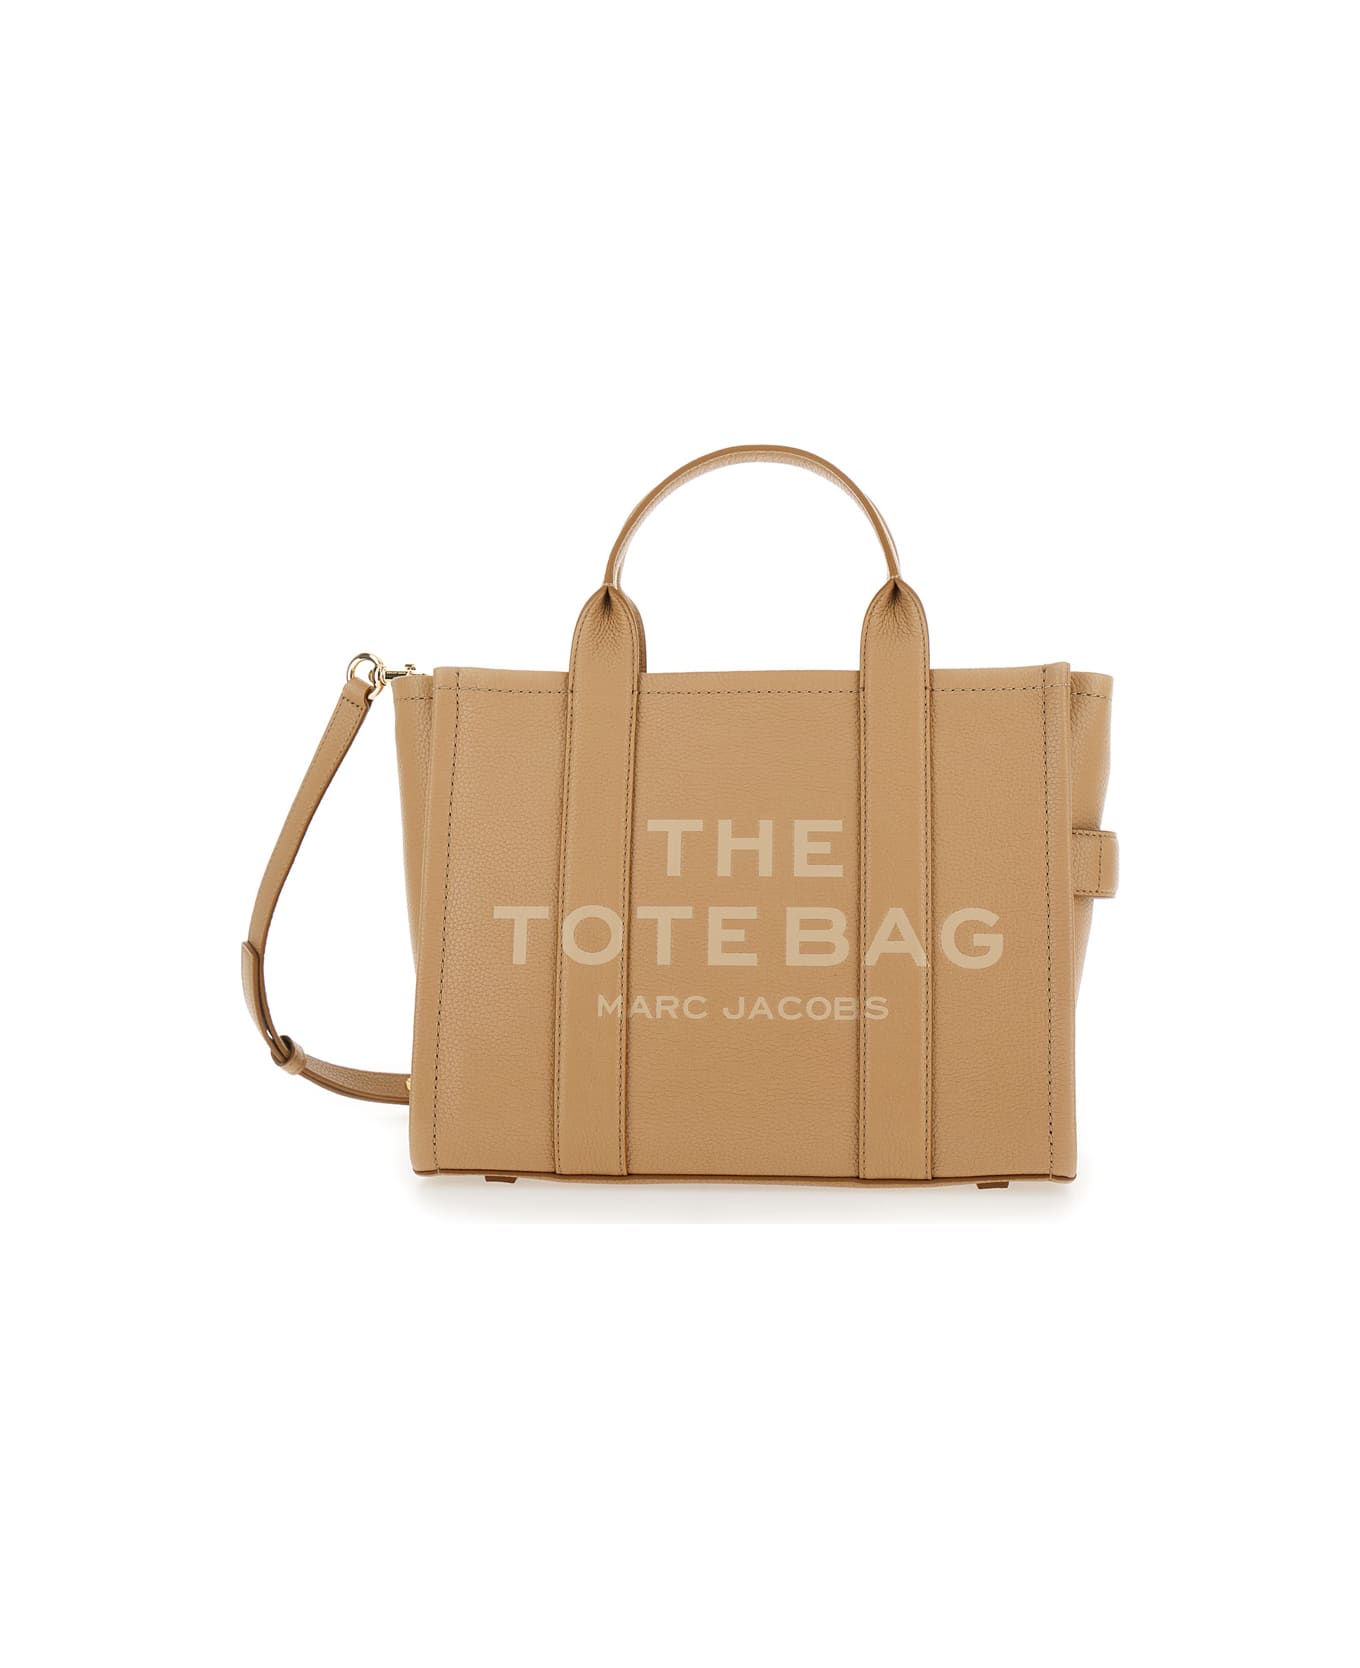 Marc Jacobs 'the Medium Tote Bag' Beige Shoulder Bag With Logo In Grainy Leather Woman - Beige トートバッグ